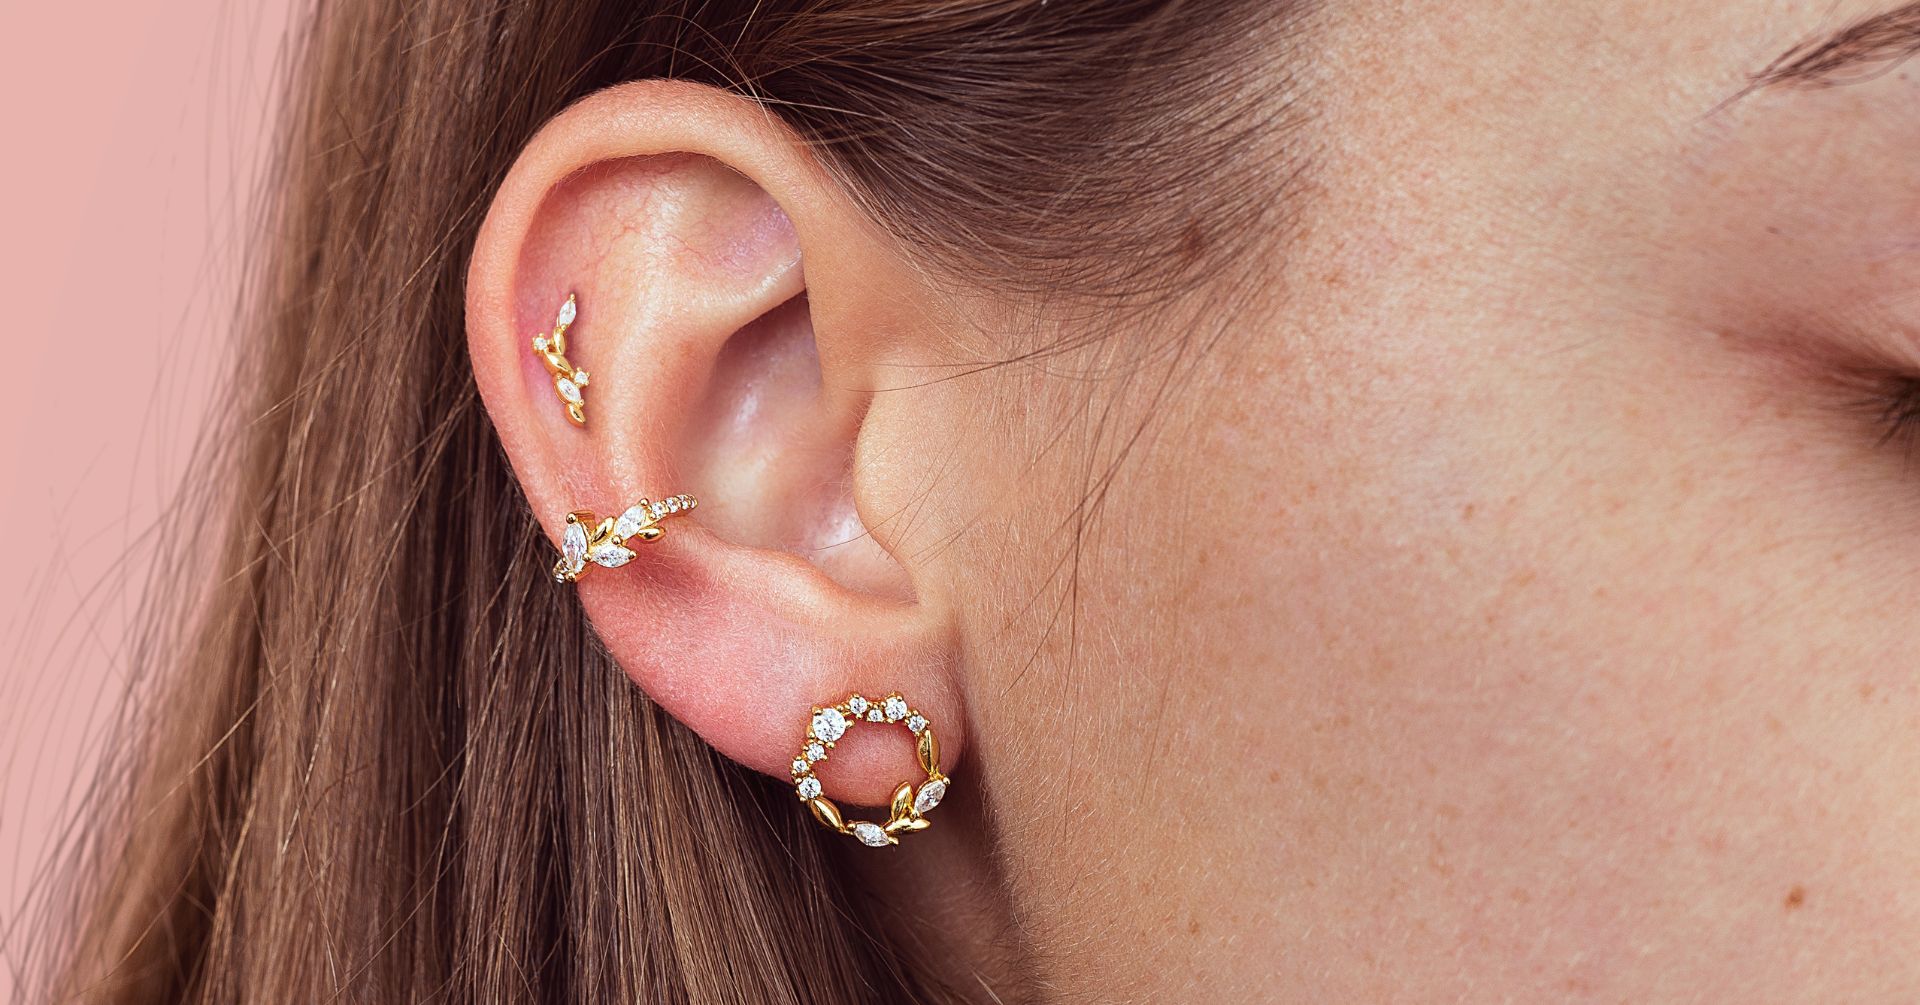 Try Studex Earrings Made Specifically for Sensitive Ears